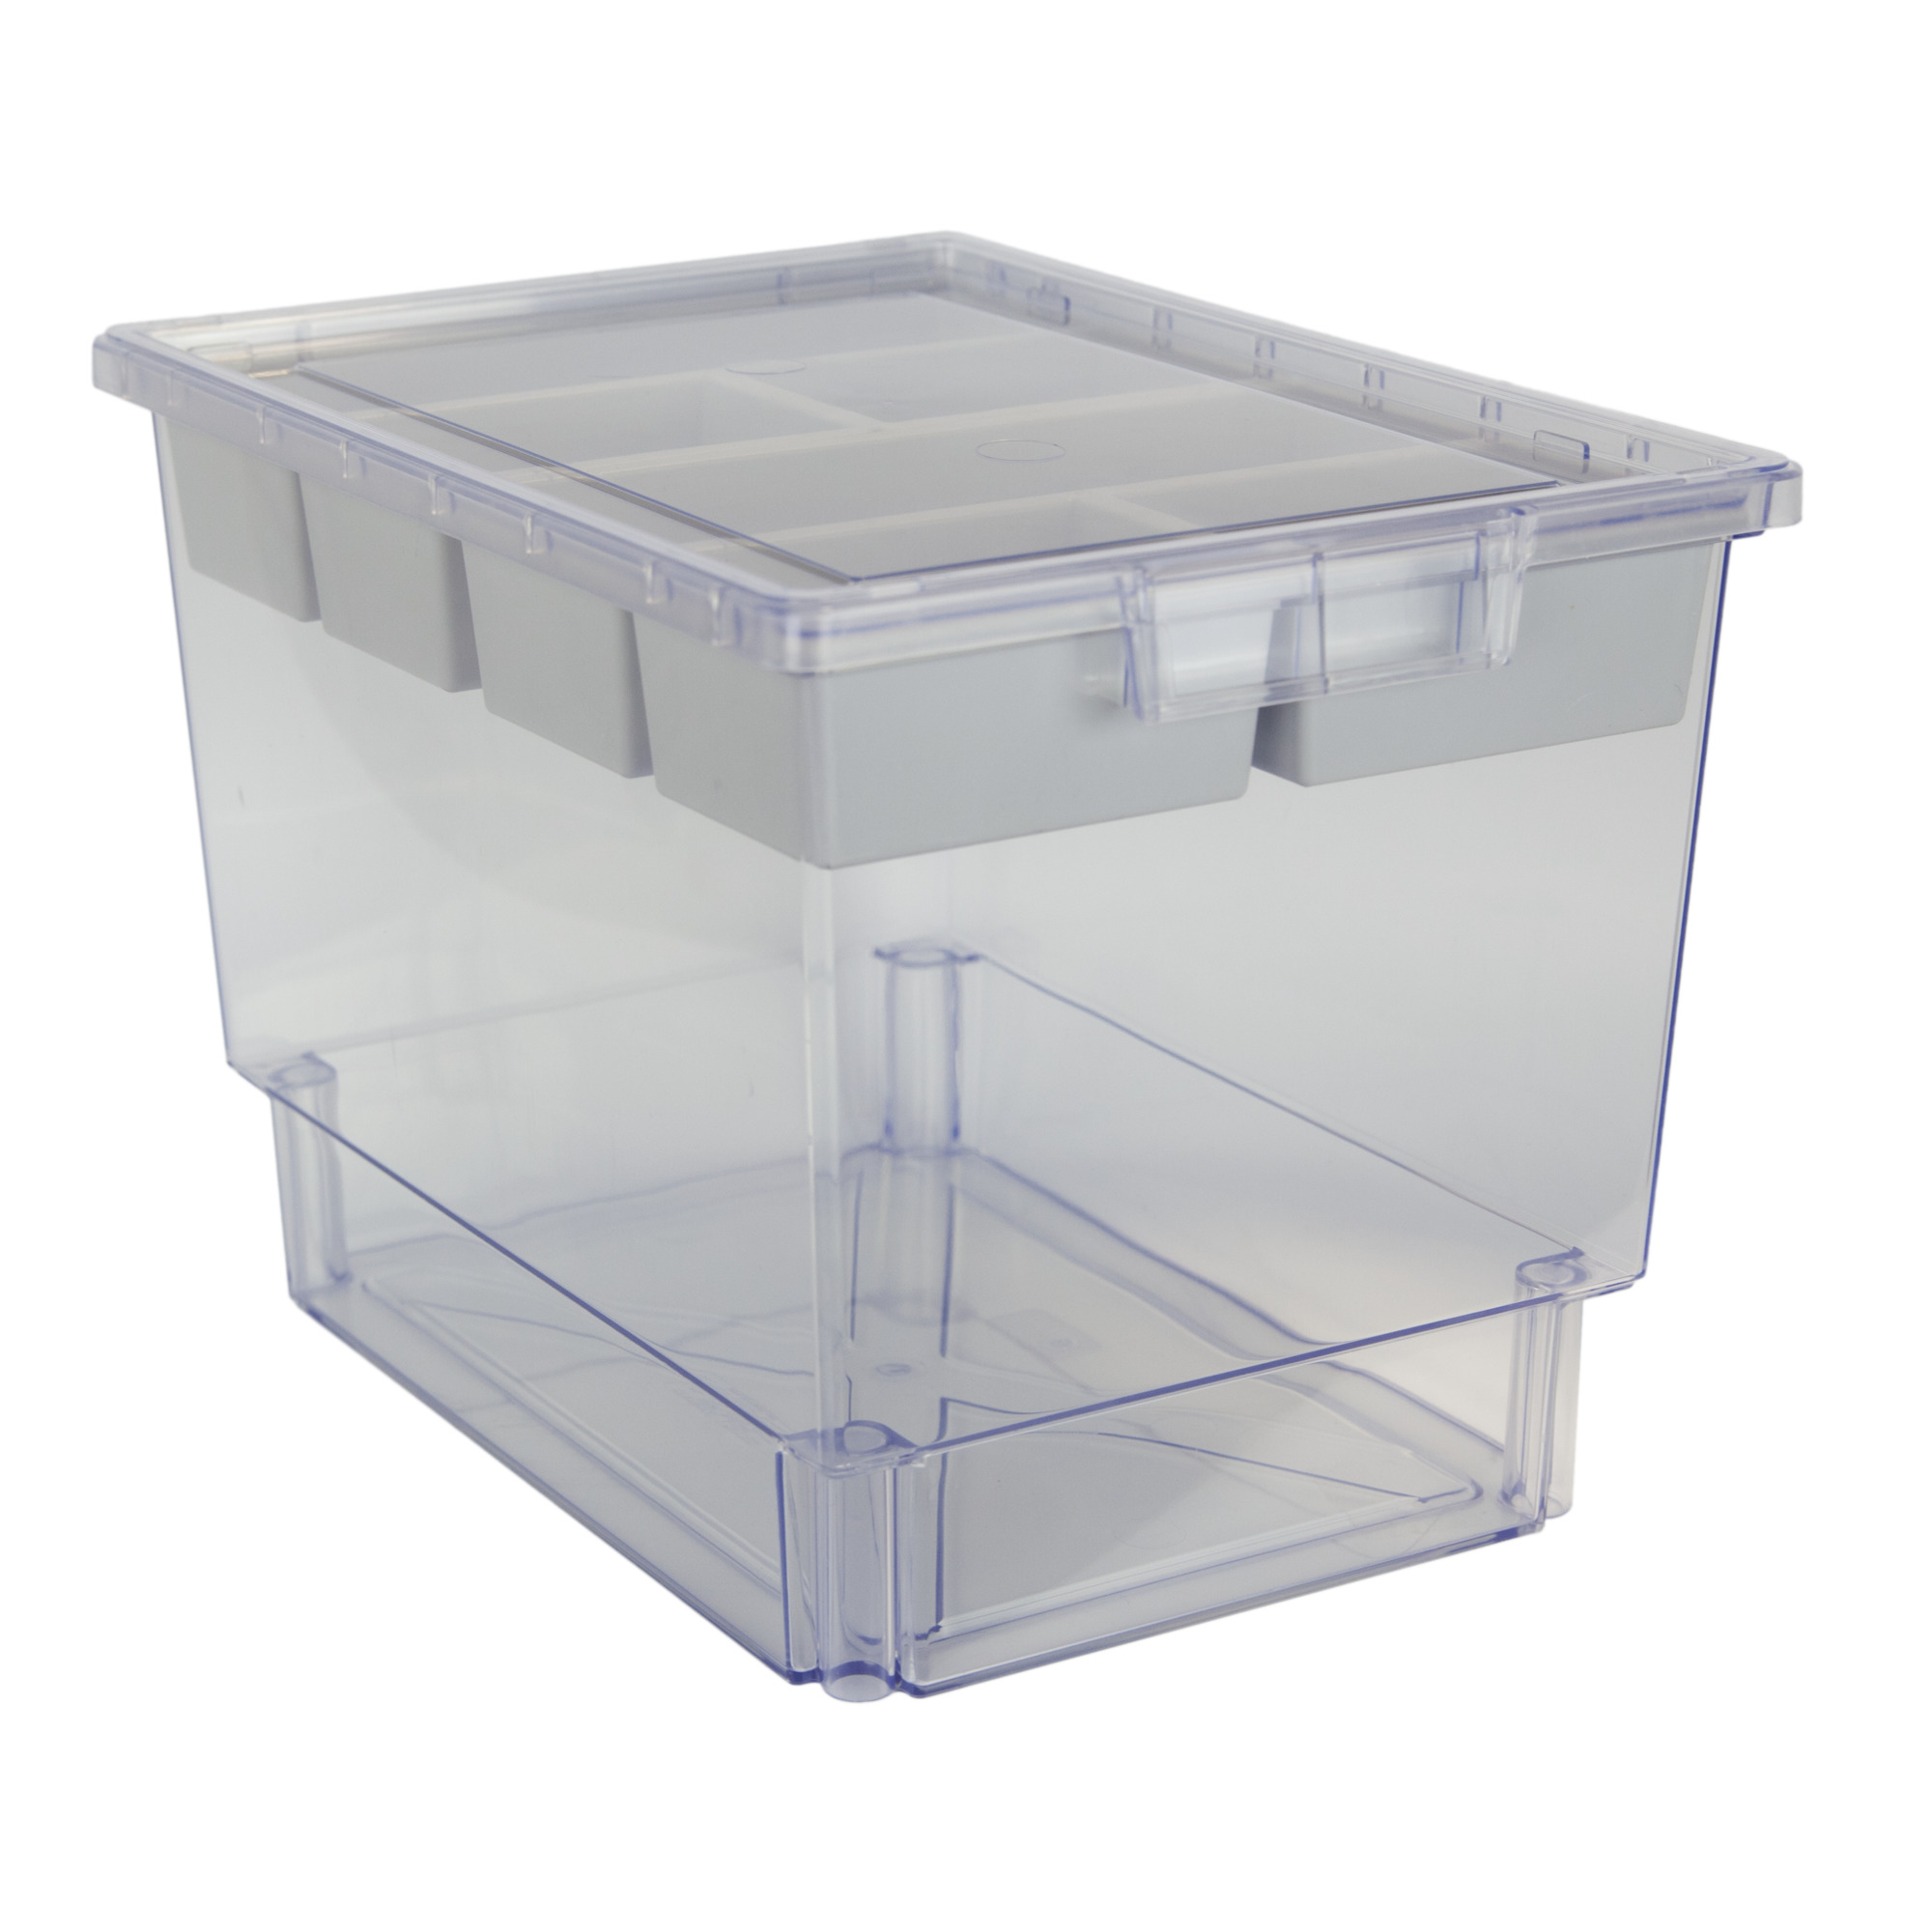 Certwood StorWerks, Slim Line 12Inch Tray Kit (3 x Divisions) Clear, Included (qty.) 1, Material Plastic, Height 9 in, Model CE1954CL-NK0004-1